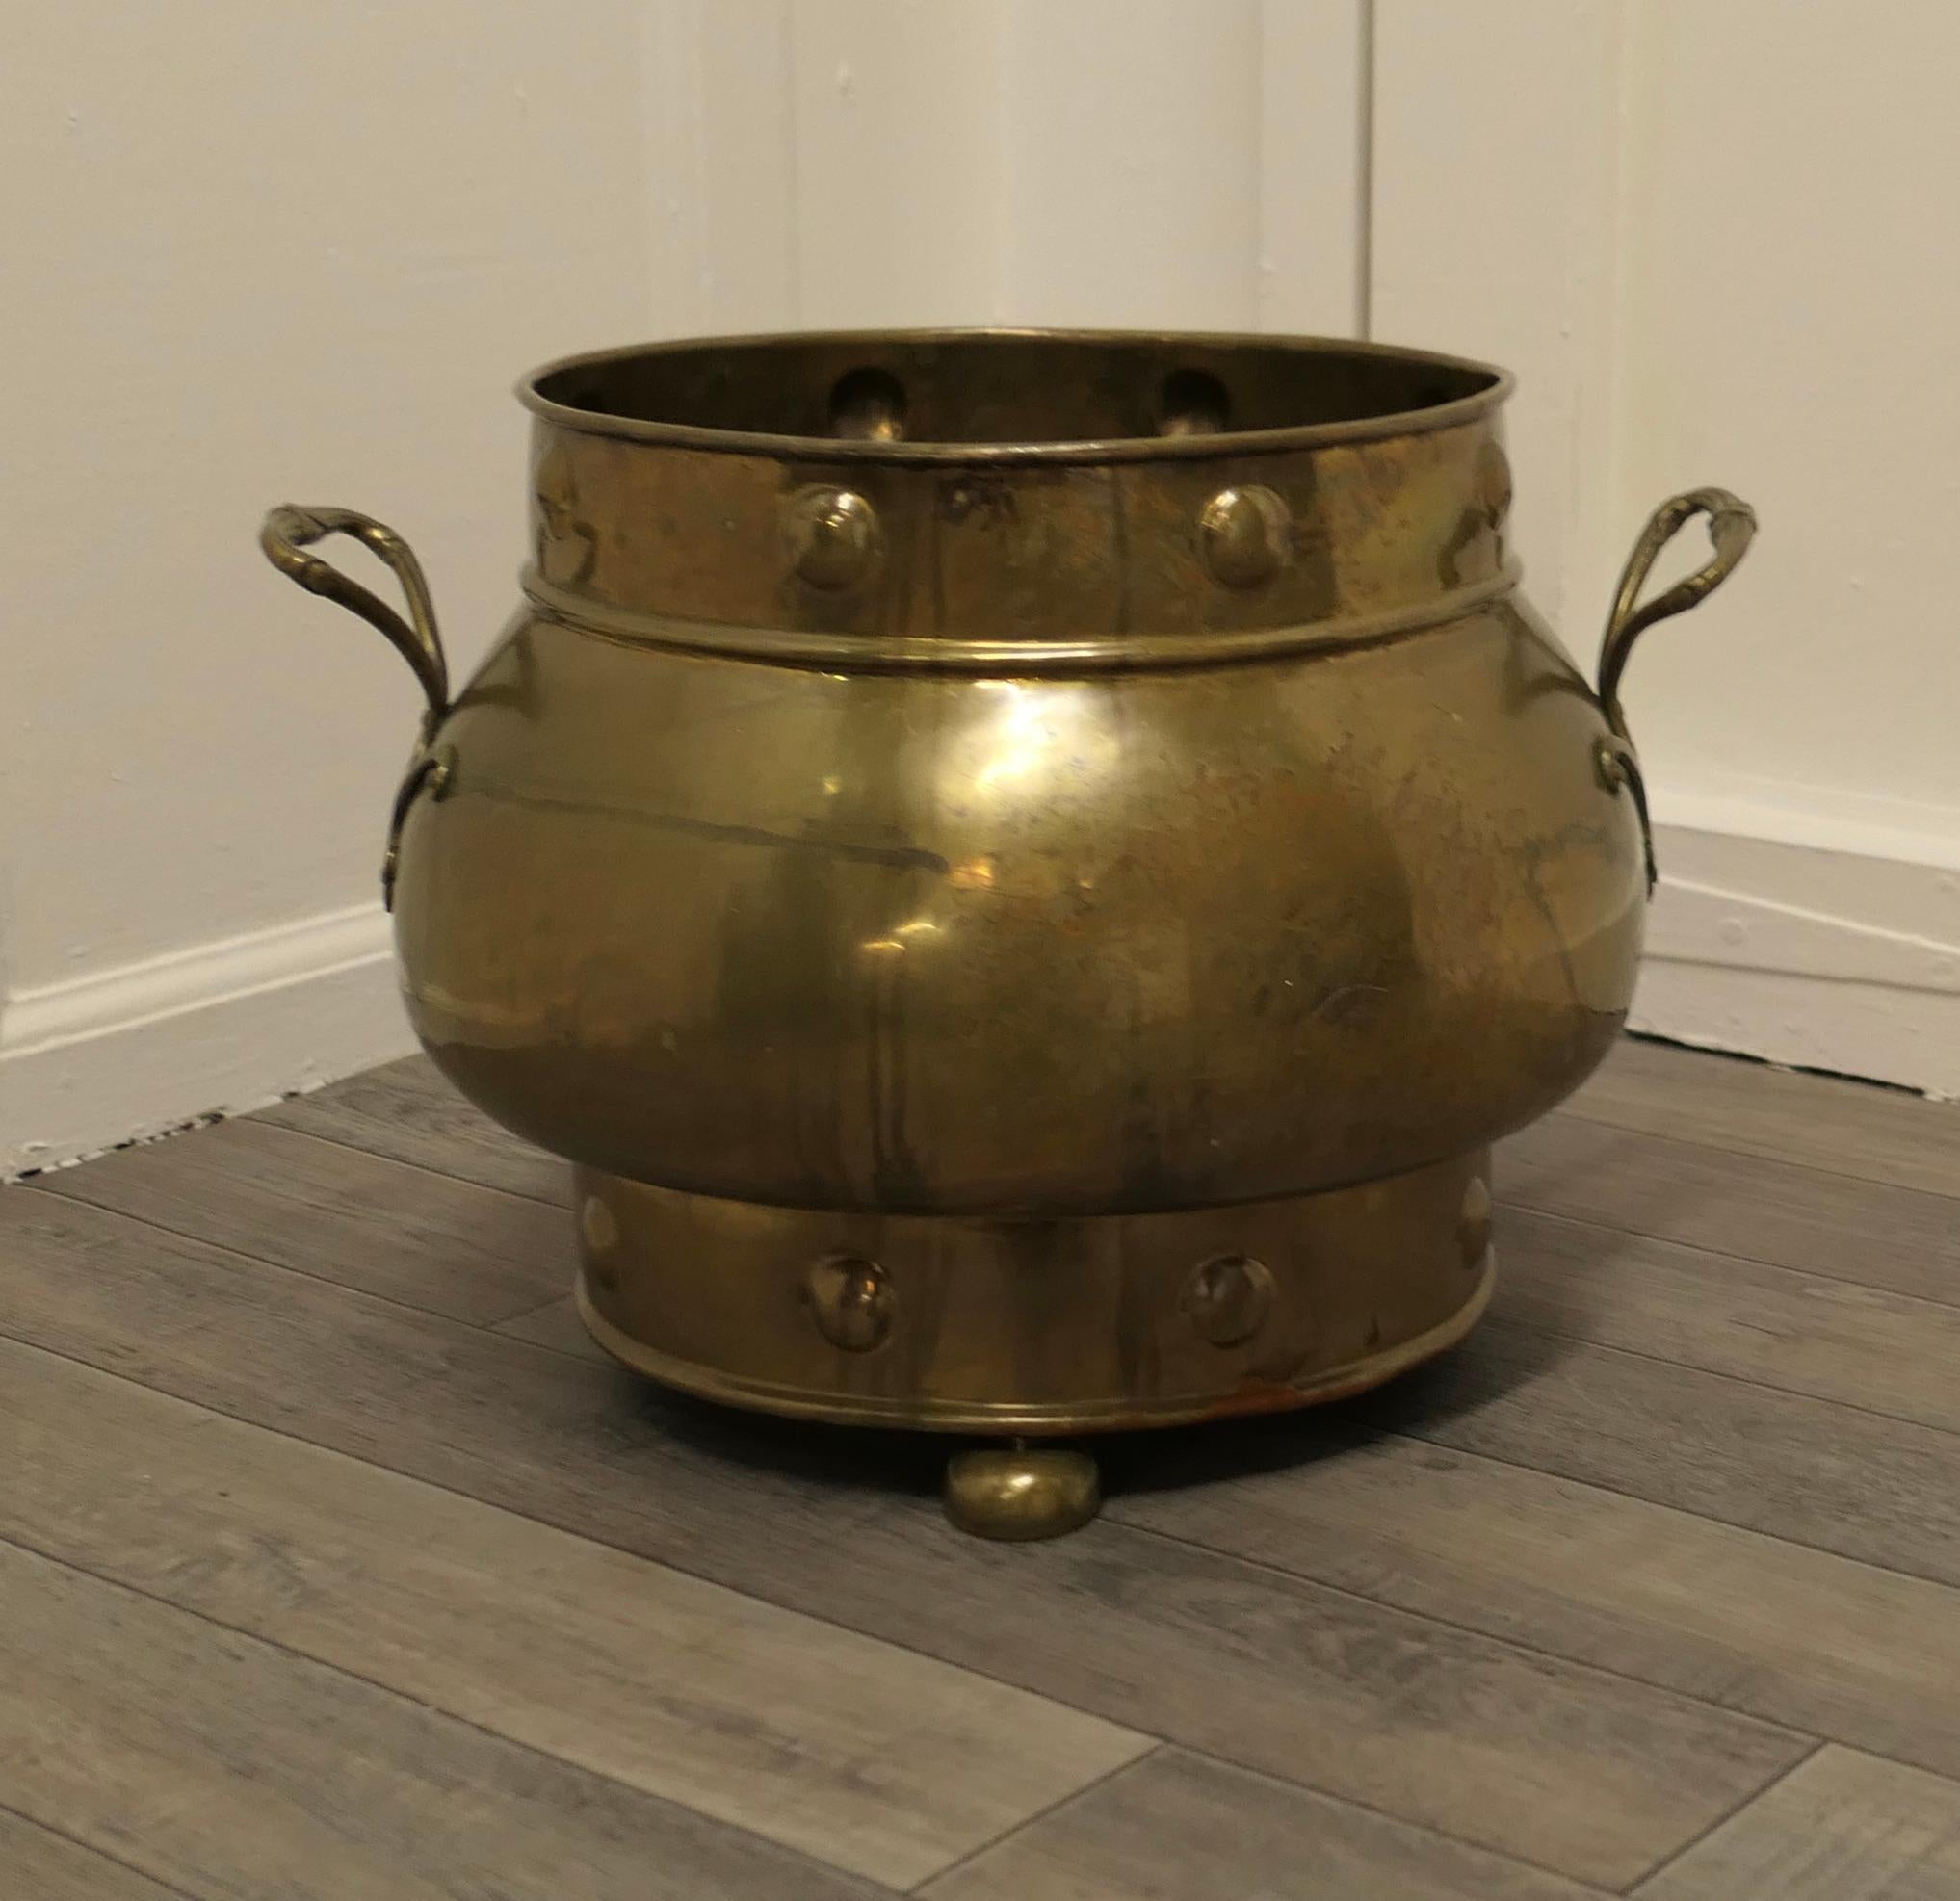 19th century pot belly brass coal bucket on feet

This is a lovely big beaten copper coal or log bucket, it has a good rounded shape with large roundels in the gothic style and would make a really good coal or log container and handy because it